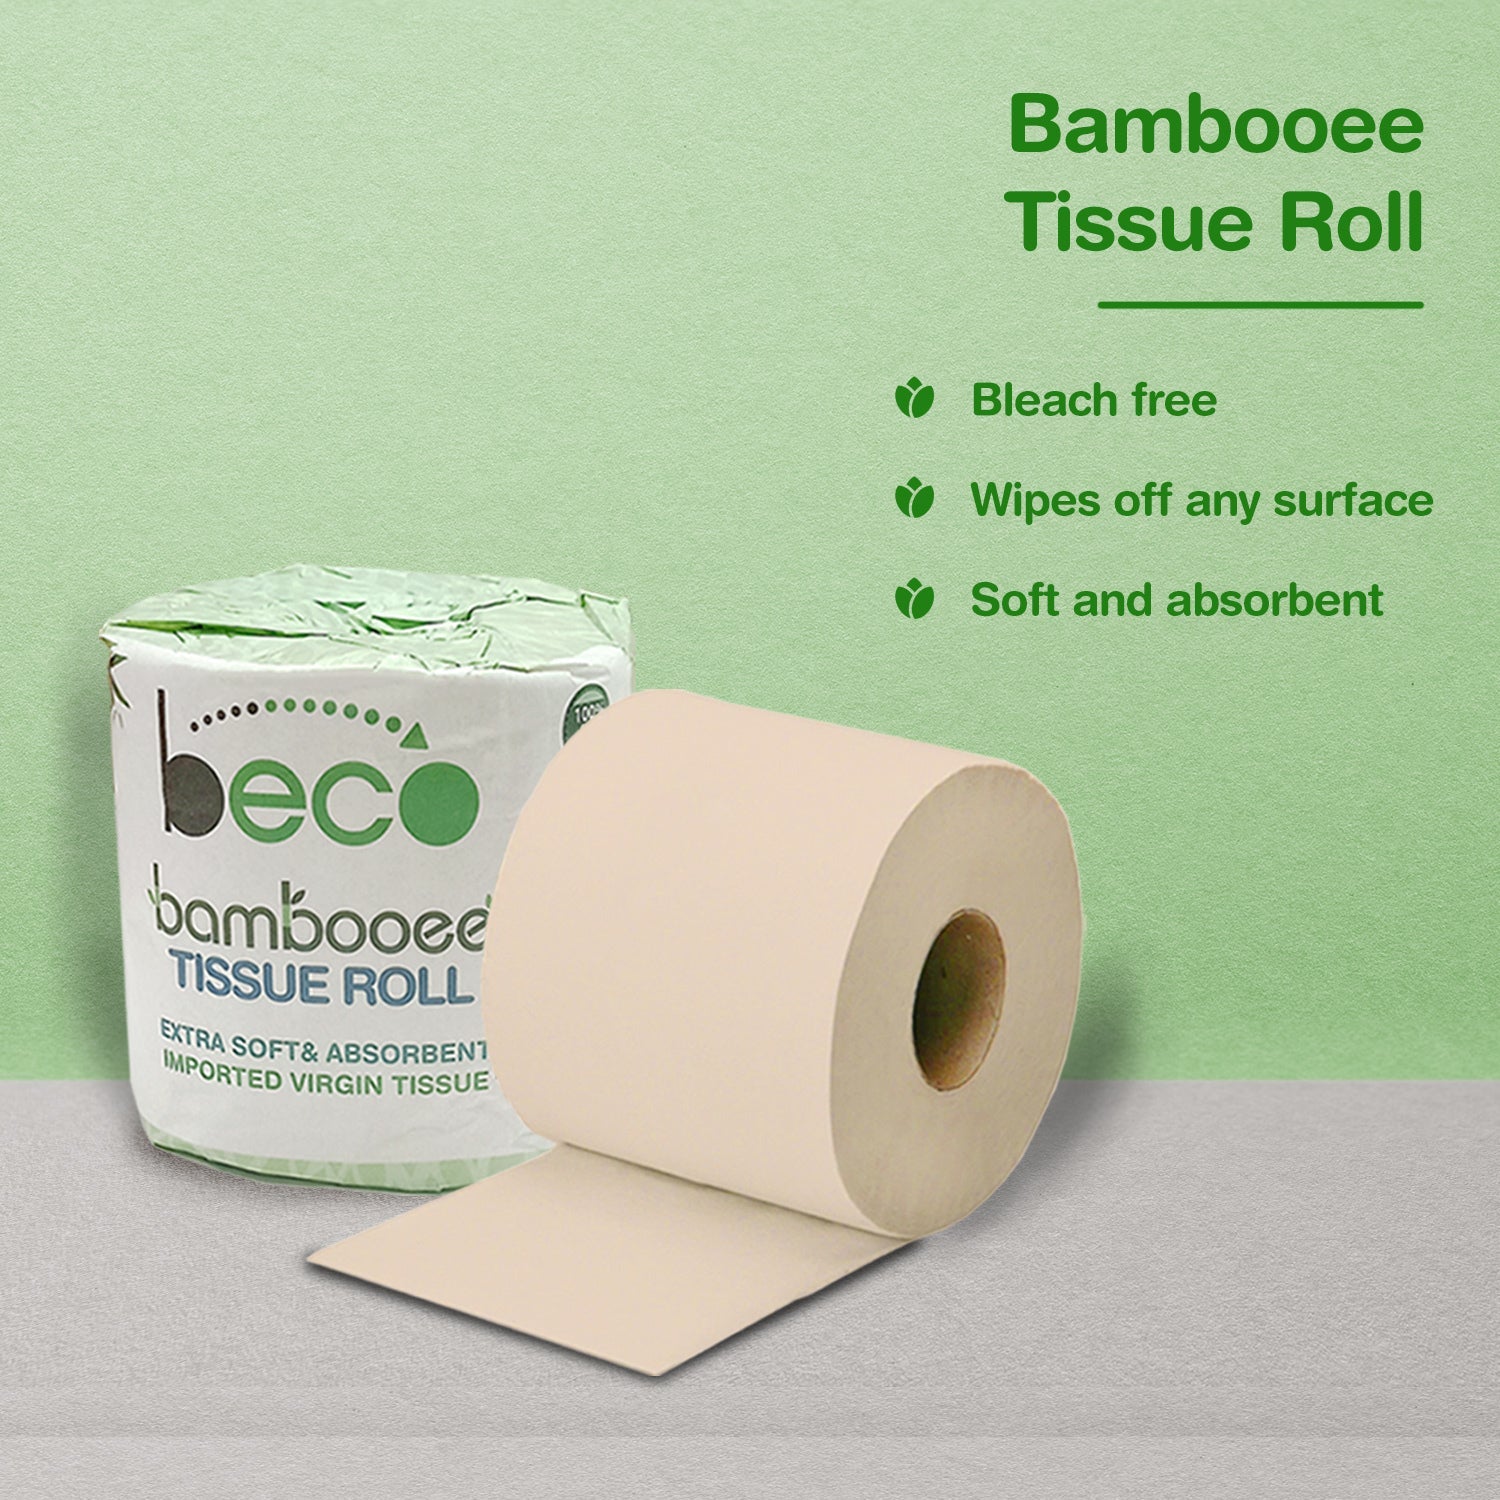 Soft Bamboo Tissue Roll | Beco